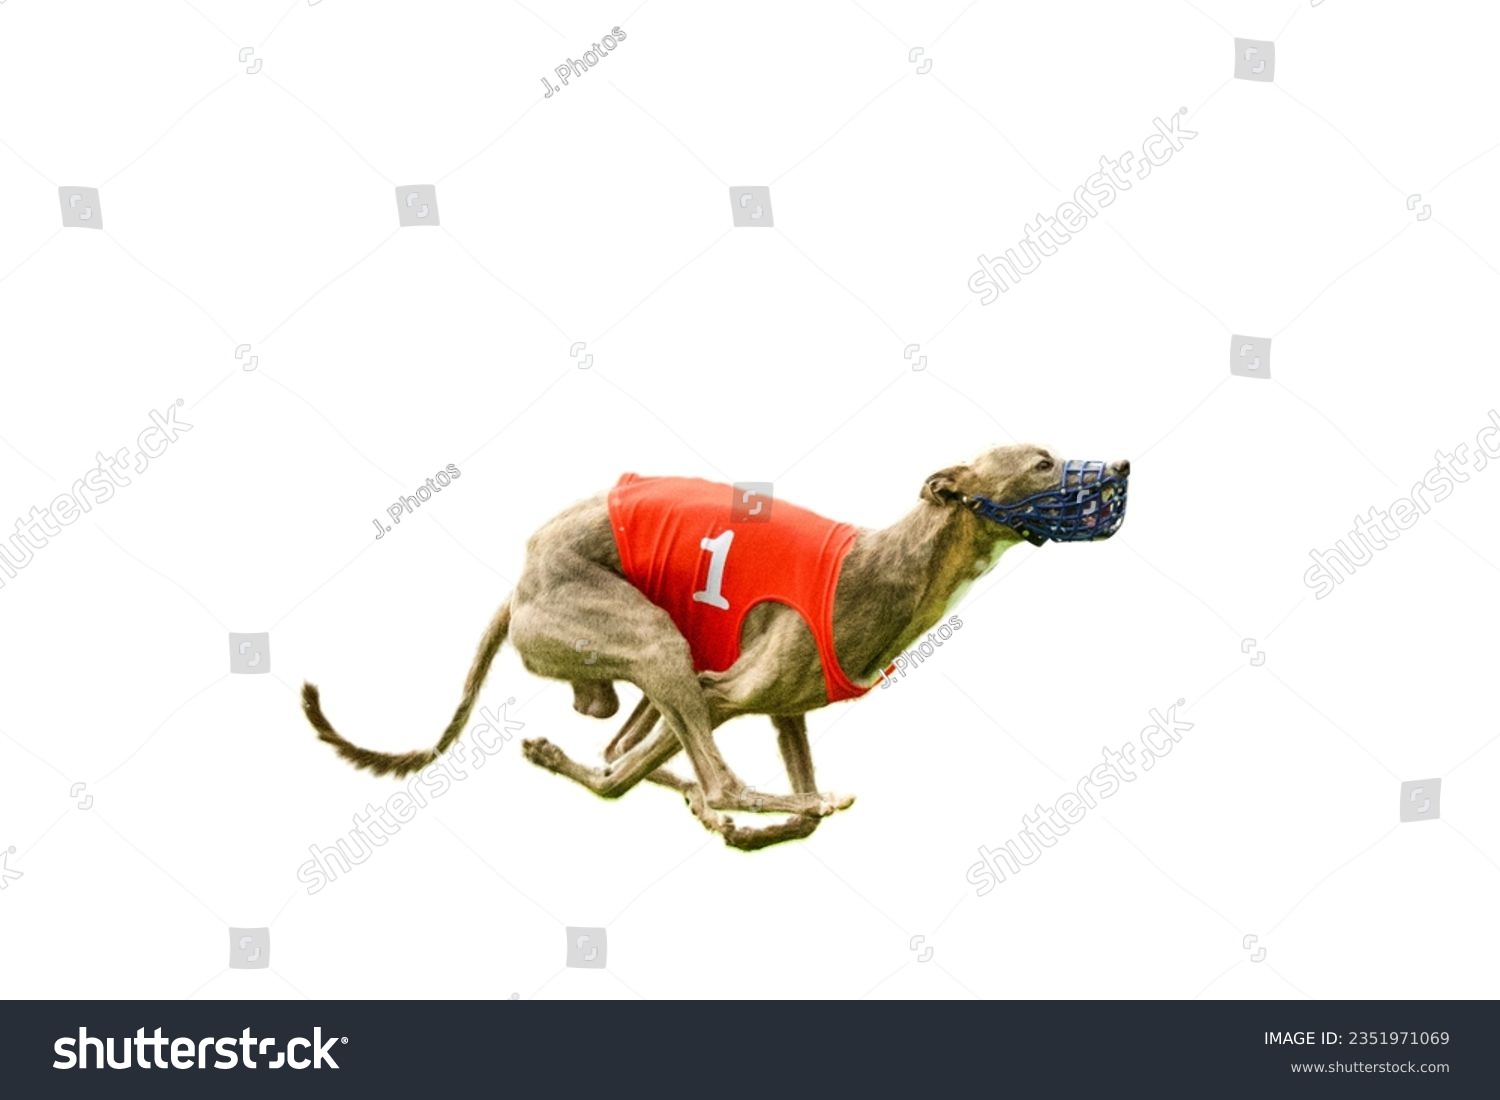 Side view of a running super fast whippet dog with a red number 1 racing jacket on a white background. It's got a crazy look of excitement. Illustration of being number one and the fastest. #2351971069